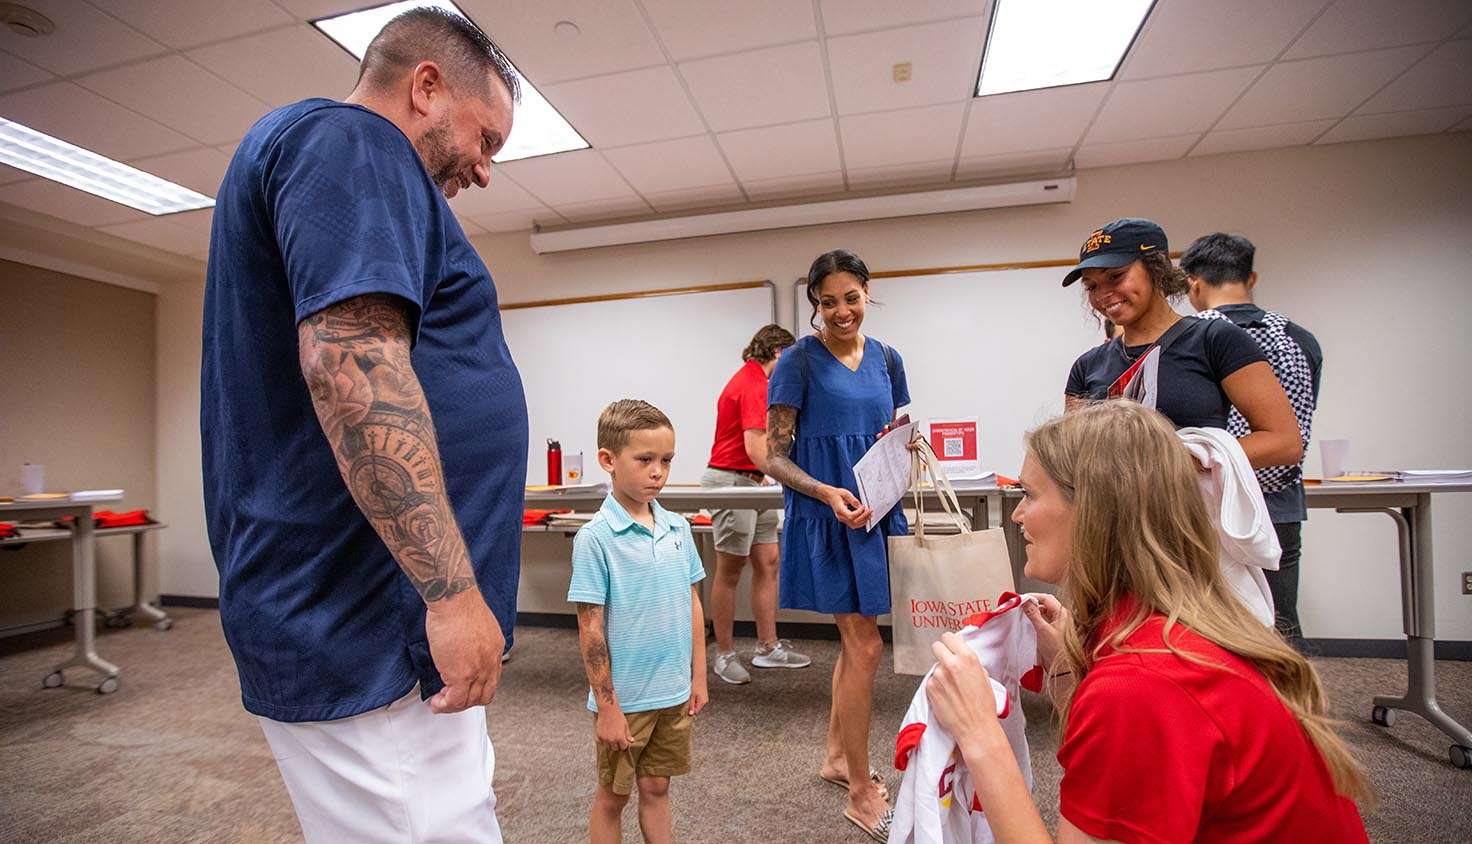 Ferguson, right, presents a gift Iowa State youth tee shirt to Landon Motter, 6, of Des Moines, while his father, Scott, mother, Kaitlyn, and incoming student and big sister, Mariah Motter look on during orientation registration.